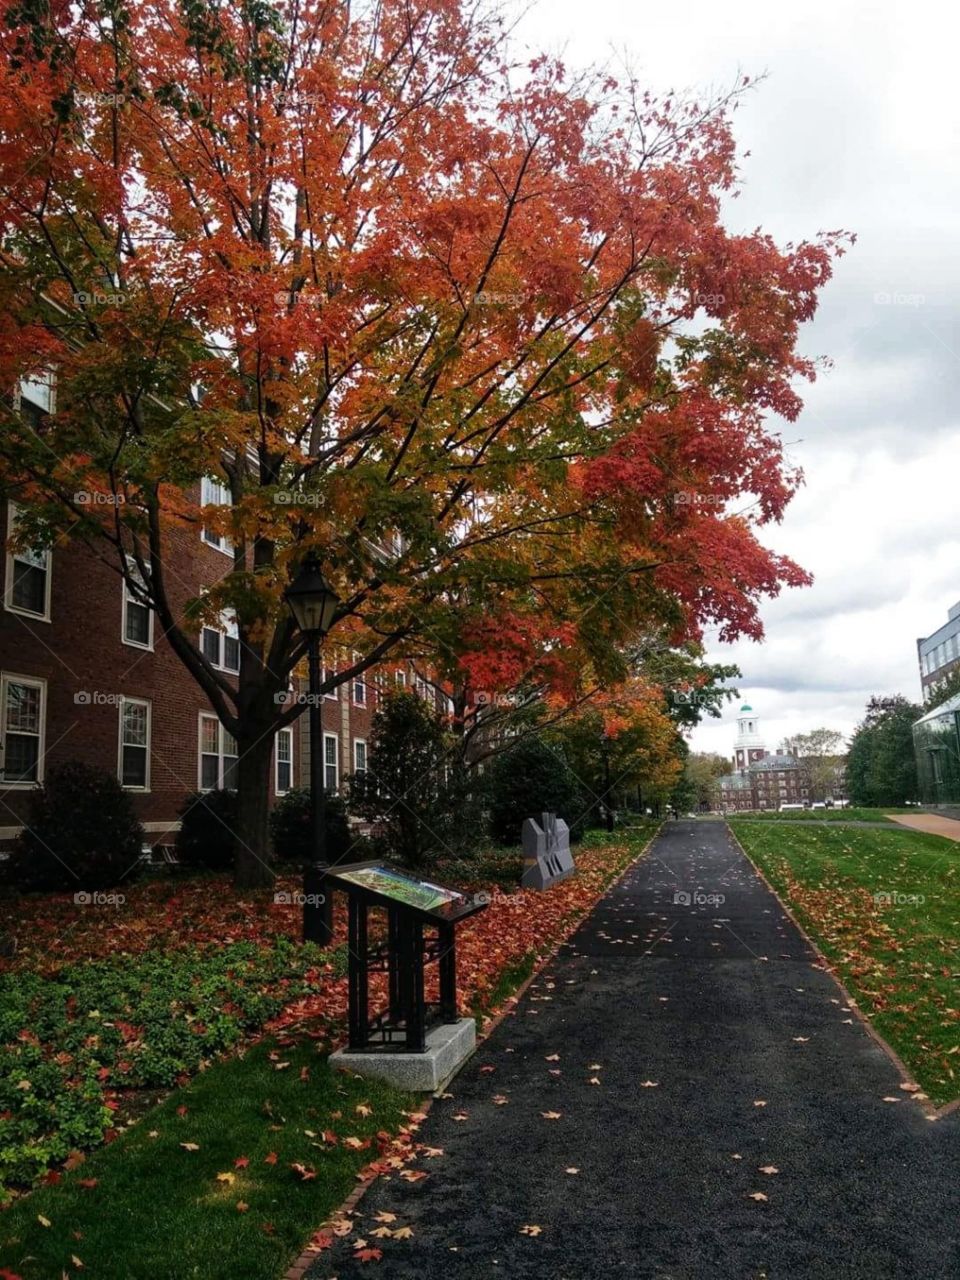 Fall colors at HBS the Howard business school USA.